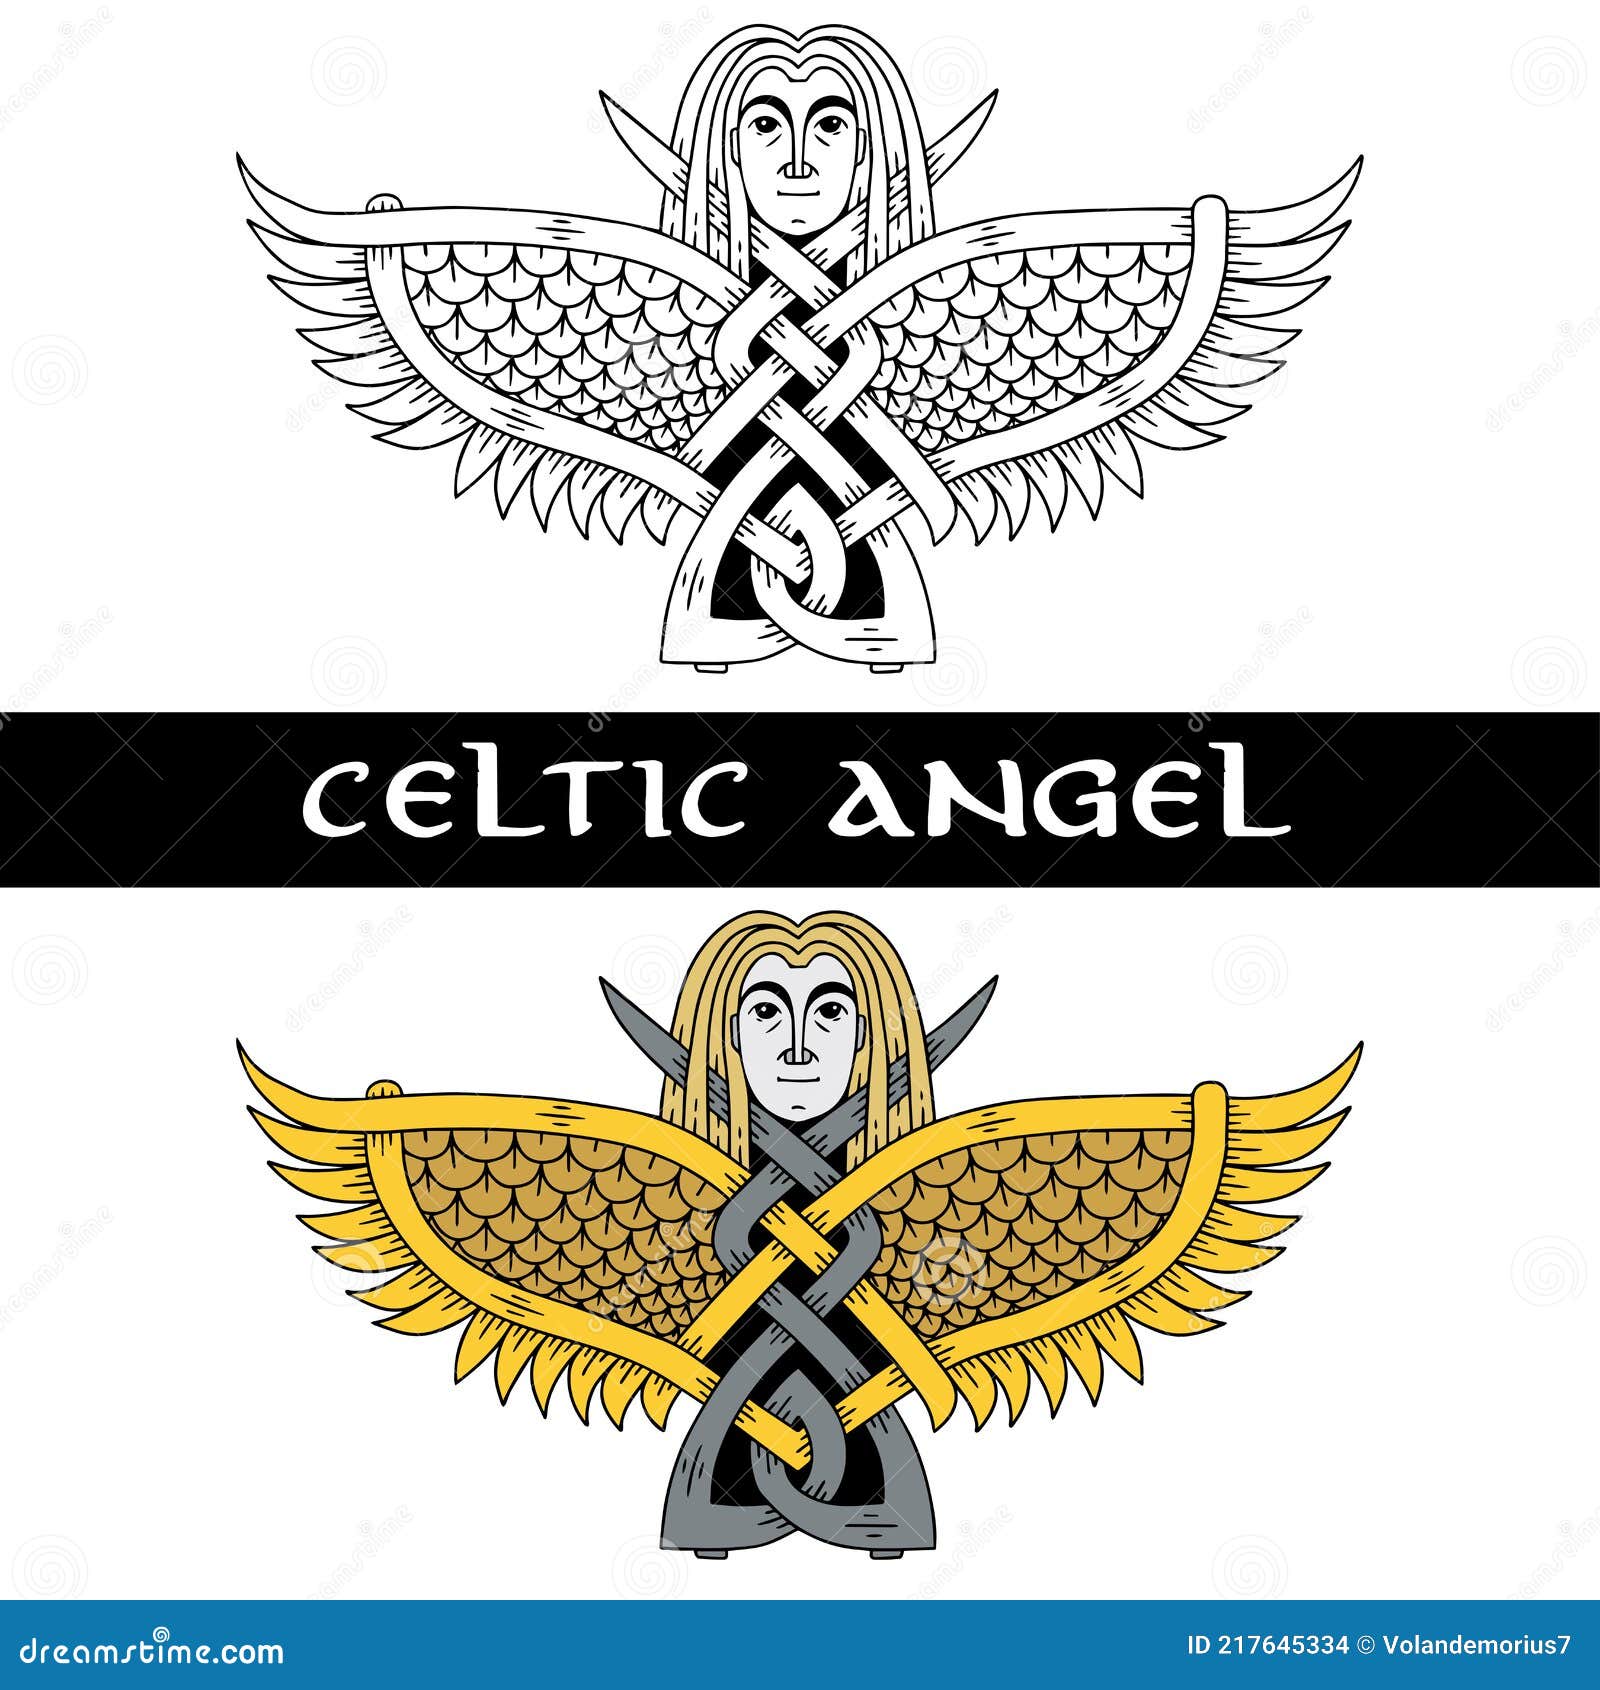 My 2nd Entry daveks bwphotocontest  Black and White Celtic Angel tattoo  with a star  Steemit